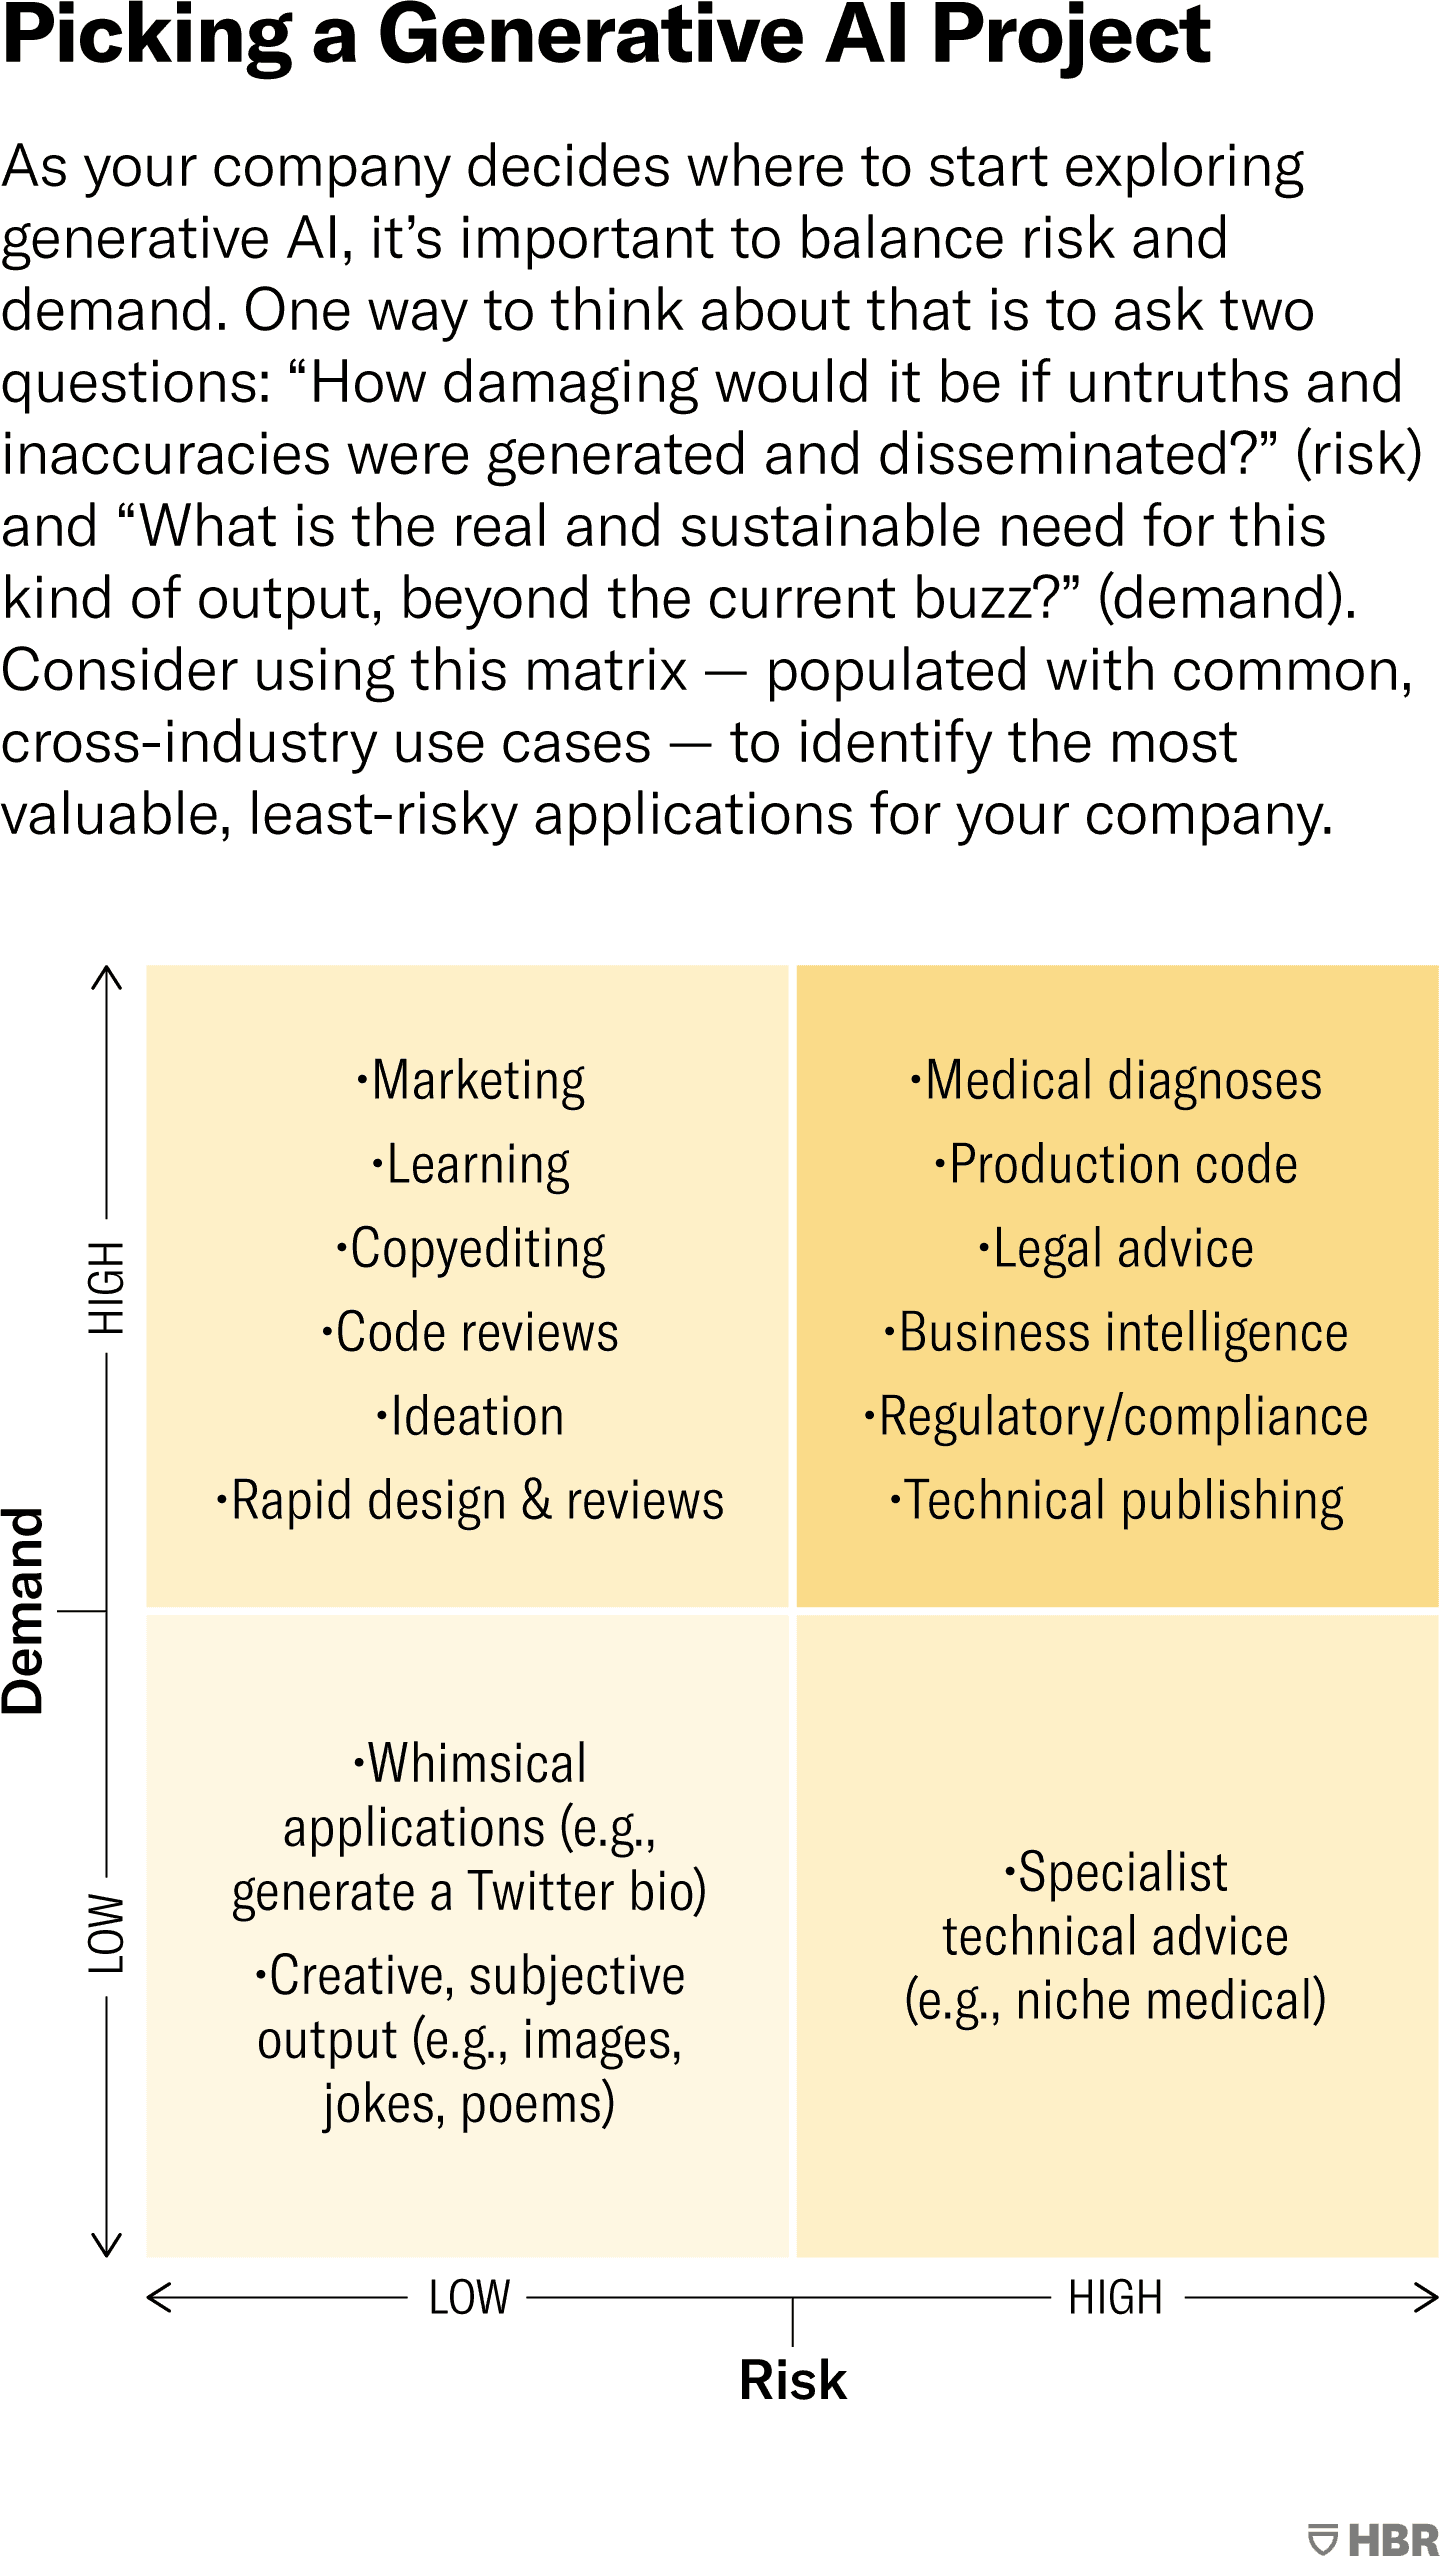 As your company decides where to start exploring generative A I, it’s important to balance risk and demand. One way to think about that is to ask two questions: “How damaging would it be if untruths and inaccuracies were generated and disseminated?” and “What is the real and sustainable need for this kind of output, beyond the current buzz?” In this 2 by 2 matrix, the authors sort common cross-industry use cases by risk and demand to provide examples of the most valuable, least risky applications for a company. For high demand, low risk applications, they suggest marketing, learning, copyediting, code reviews, ideation, and rapid design and reviews. For high demand, high risk applications, they suggest medical diagnoses, production code, legal advice, business intelligence, regulatory and compliance, and technical publishing. For low risk, low demand use, they suggest whimsical applications such as funny twitter bios, and creative, subjective output such as images, jokes, and poems. For low demand, high risk applications, they suggest specialist technical advice, for example, niche medical topics.